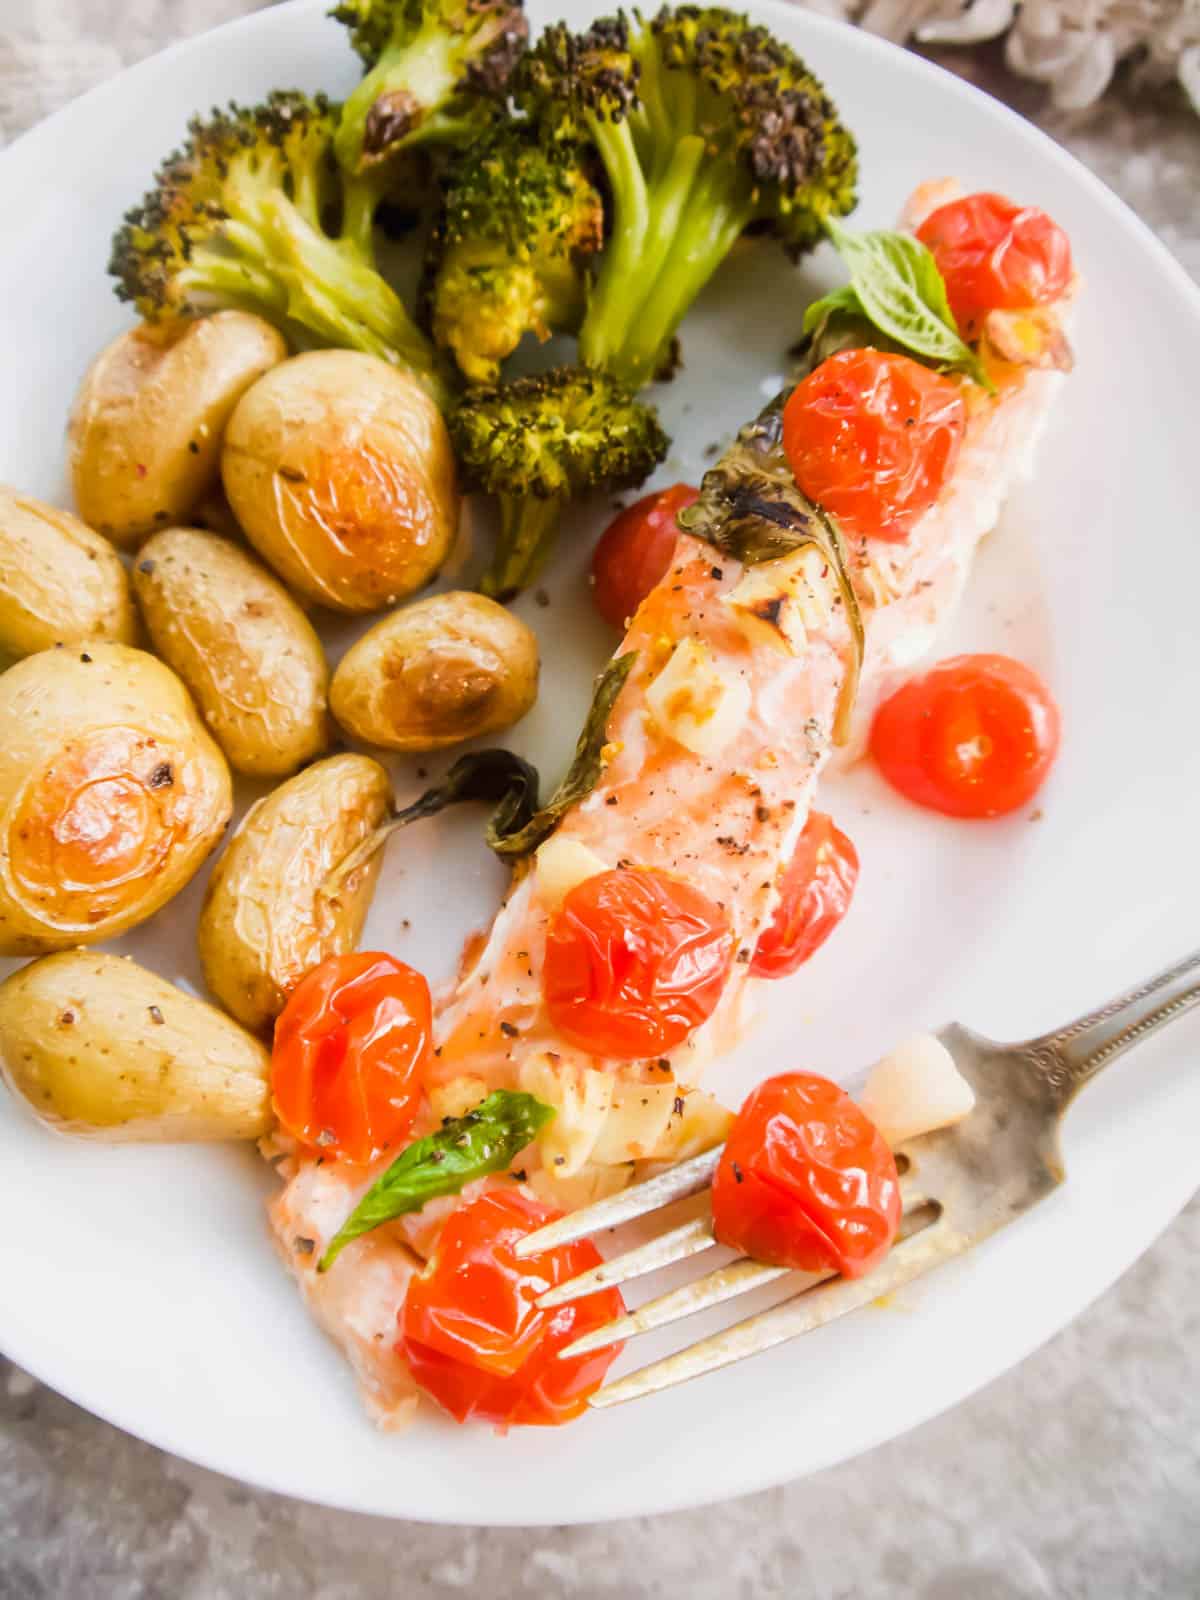 Salmon and tomatoes on a plate with potatoes.